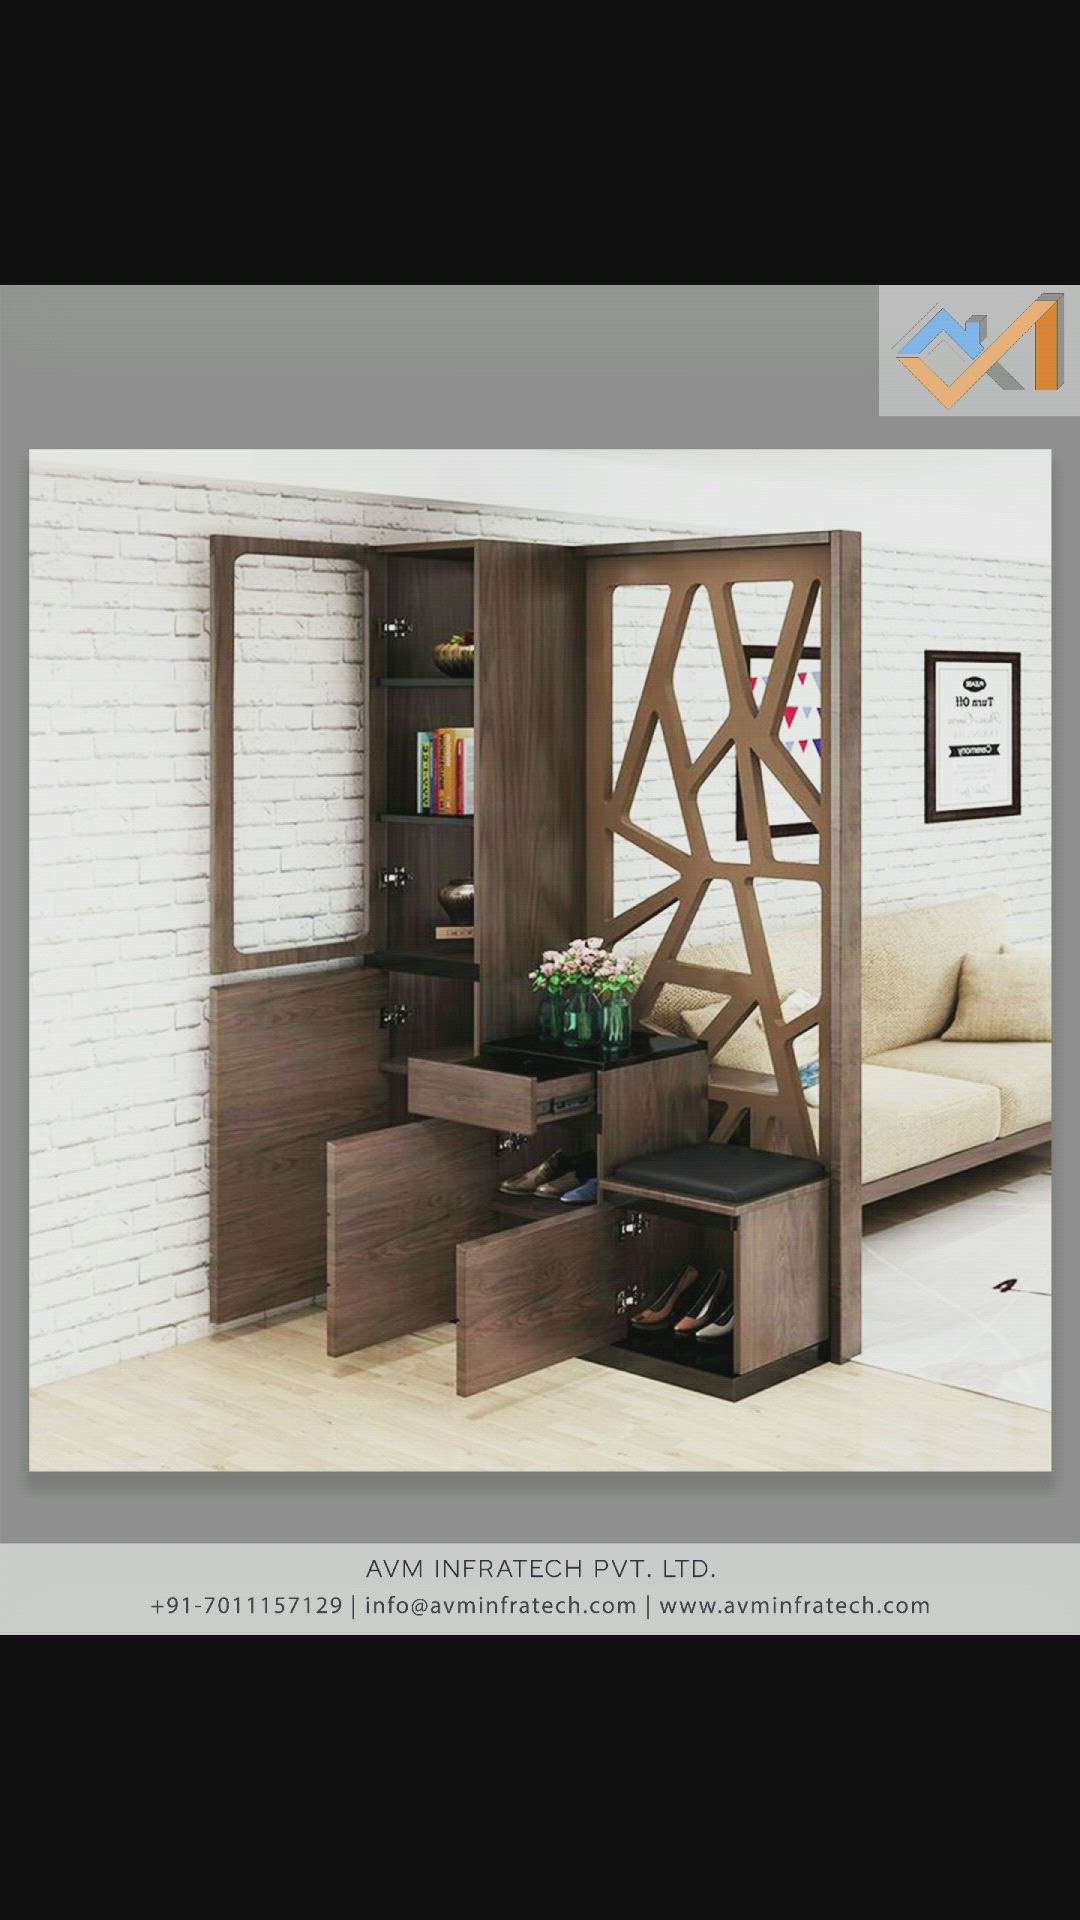 Room partition designs are perfect for segregating huge rooms, to demarcate the space or disguise messy areas from open view.

Follow us for more such amazing updates. 
.
.
#architect #architecture #interior #interiordesign #commercial #partition #wooden #designprocess #designinterior #bookshelf #decoration #trendy #latest #decor #panel #brown #vibes #roompartition #wood